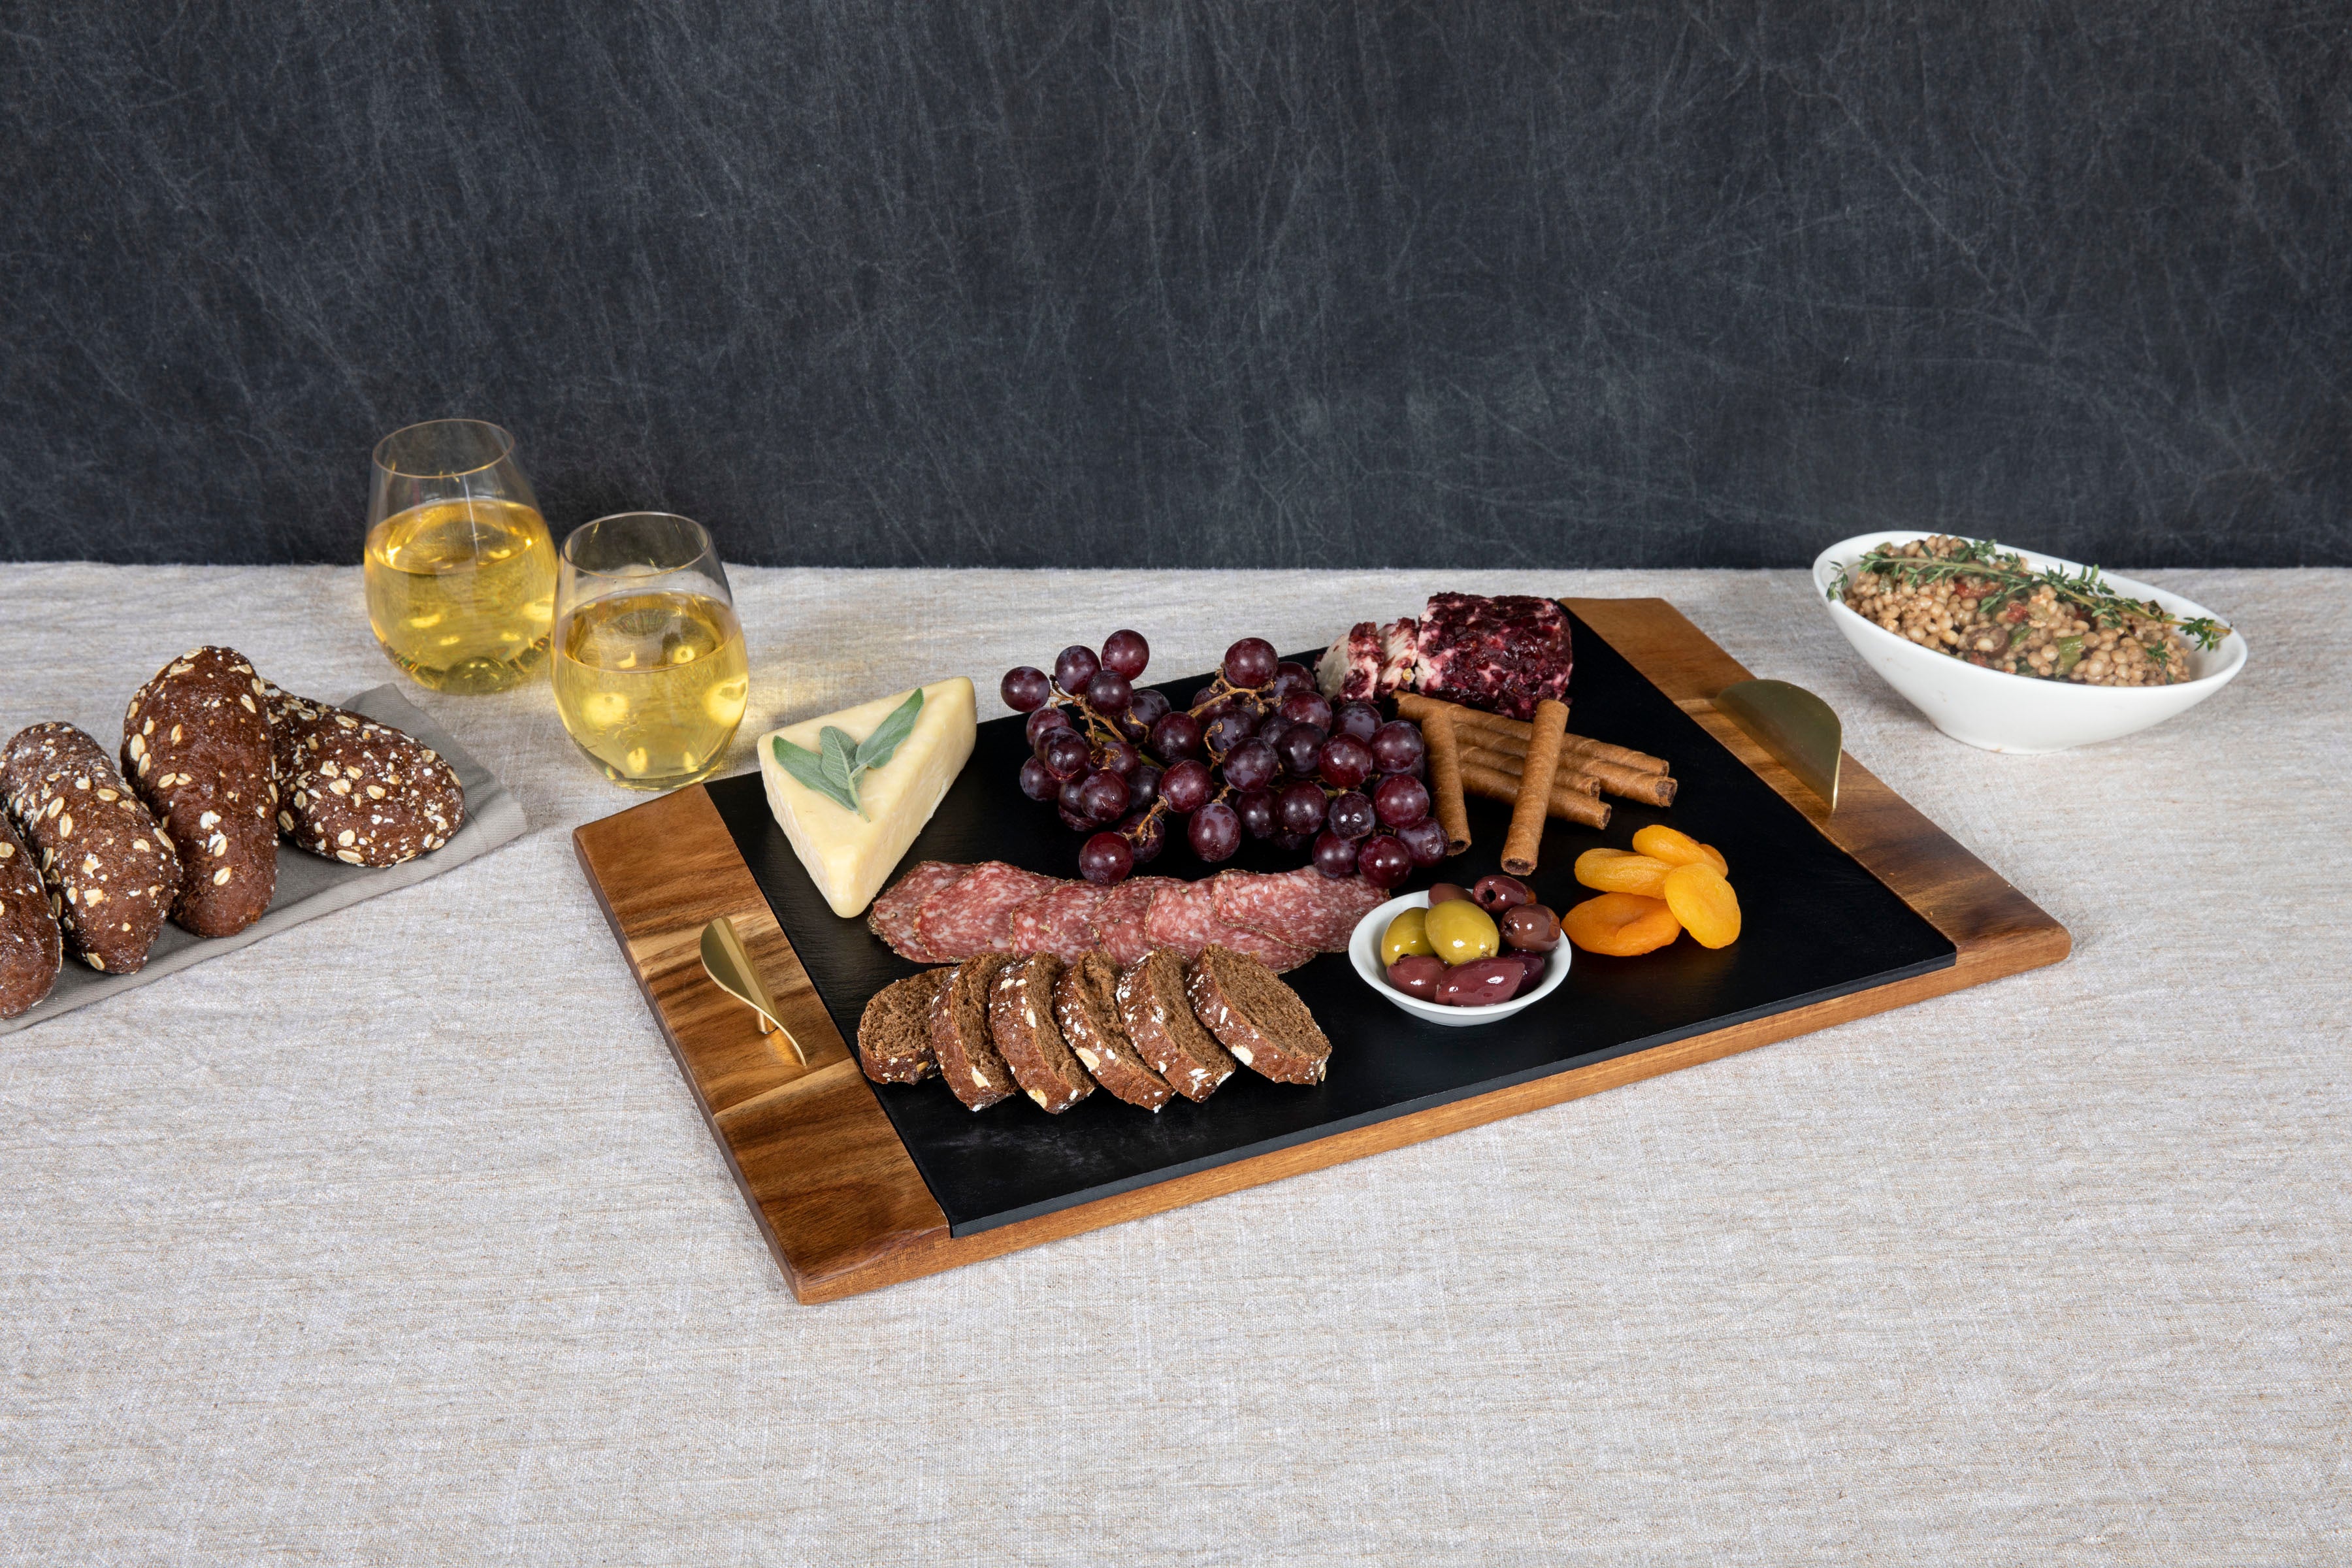 Los Angeles Chargers - Covina Acacia and Slate Serving Tray